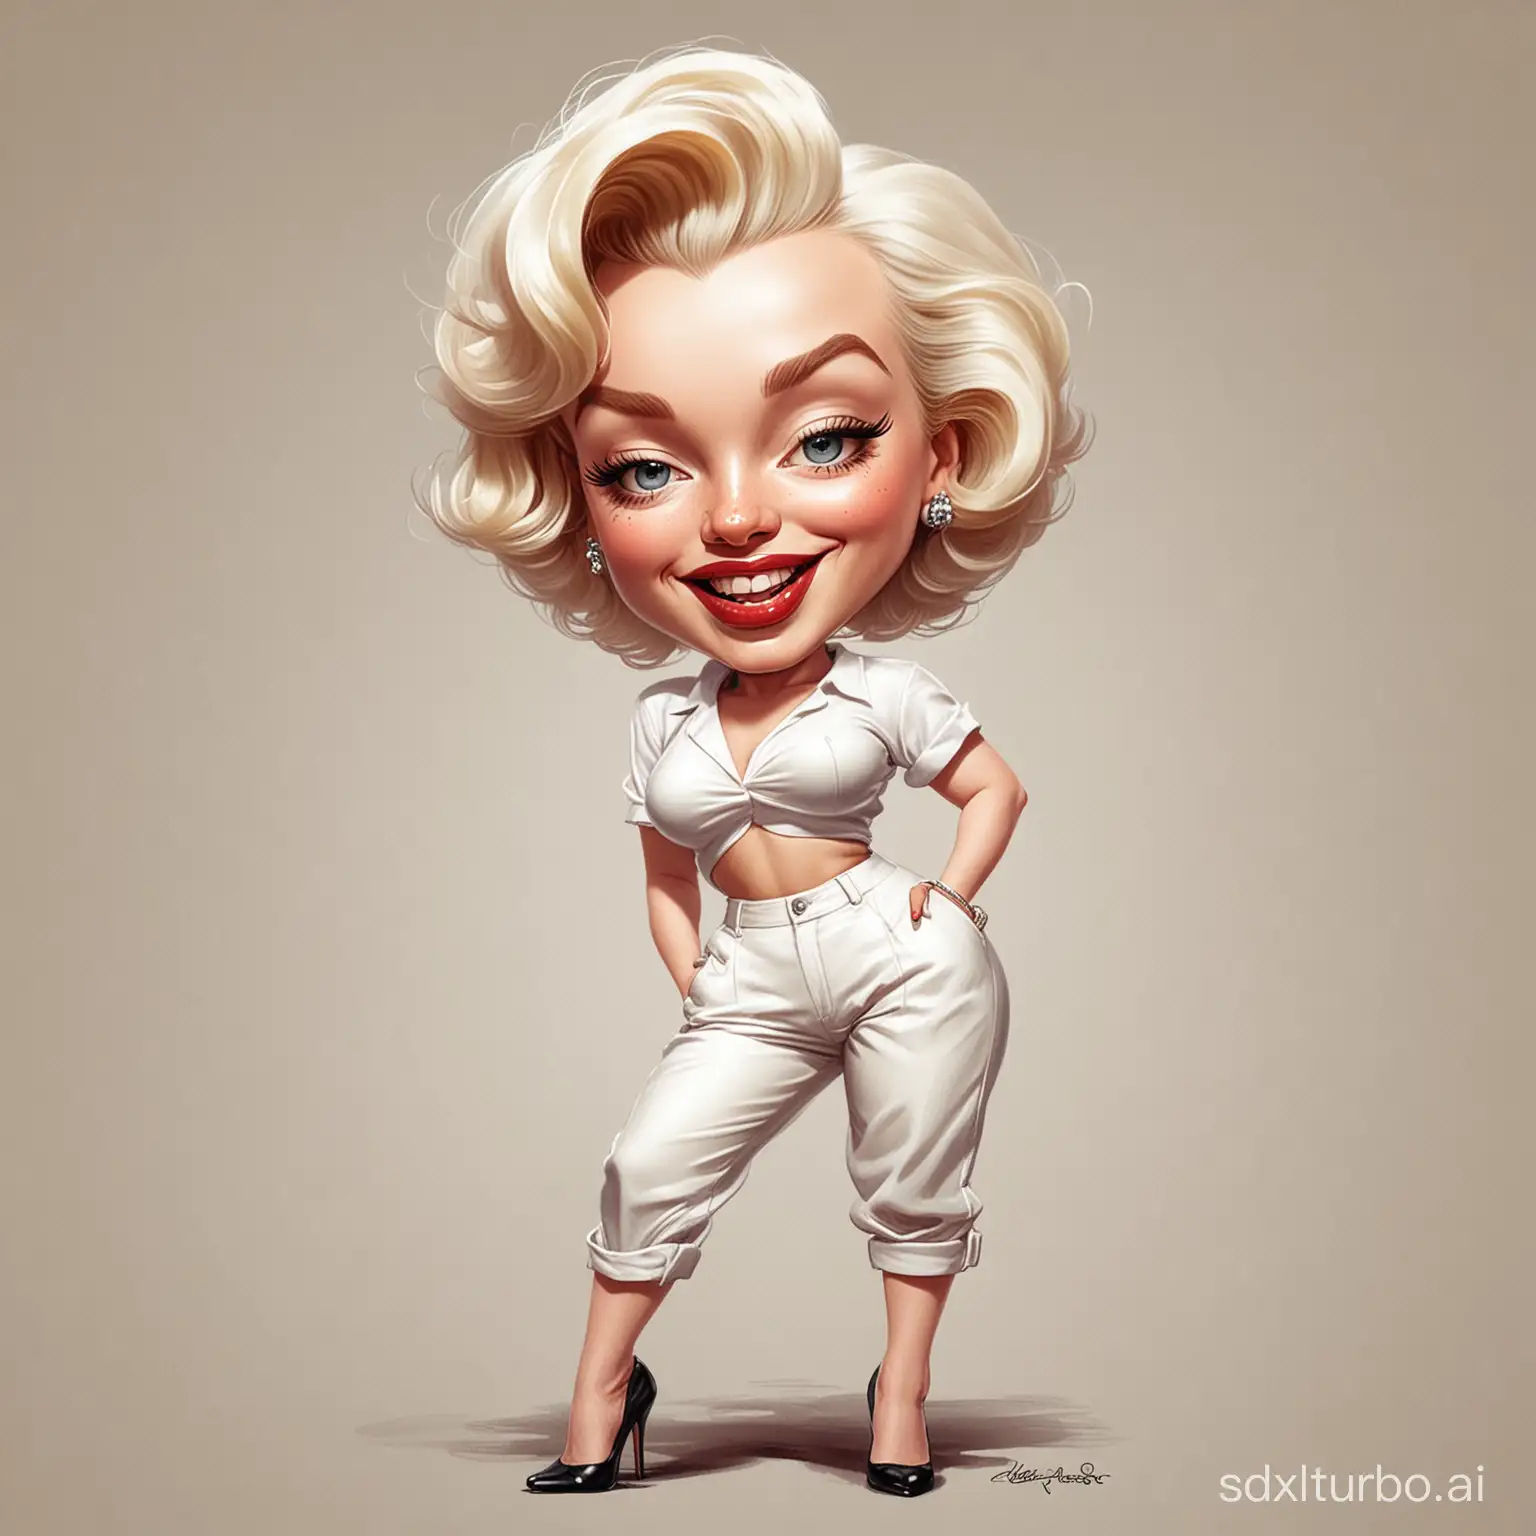 Whimsical-Caricature-of-Marilyn-Monroe-in-Playful-Kitty-Pants-and-White-Top